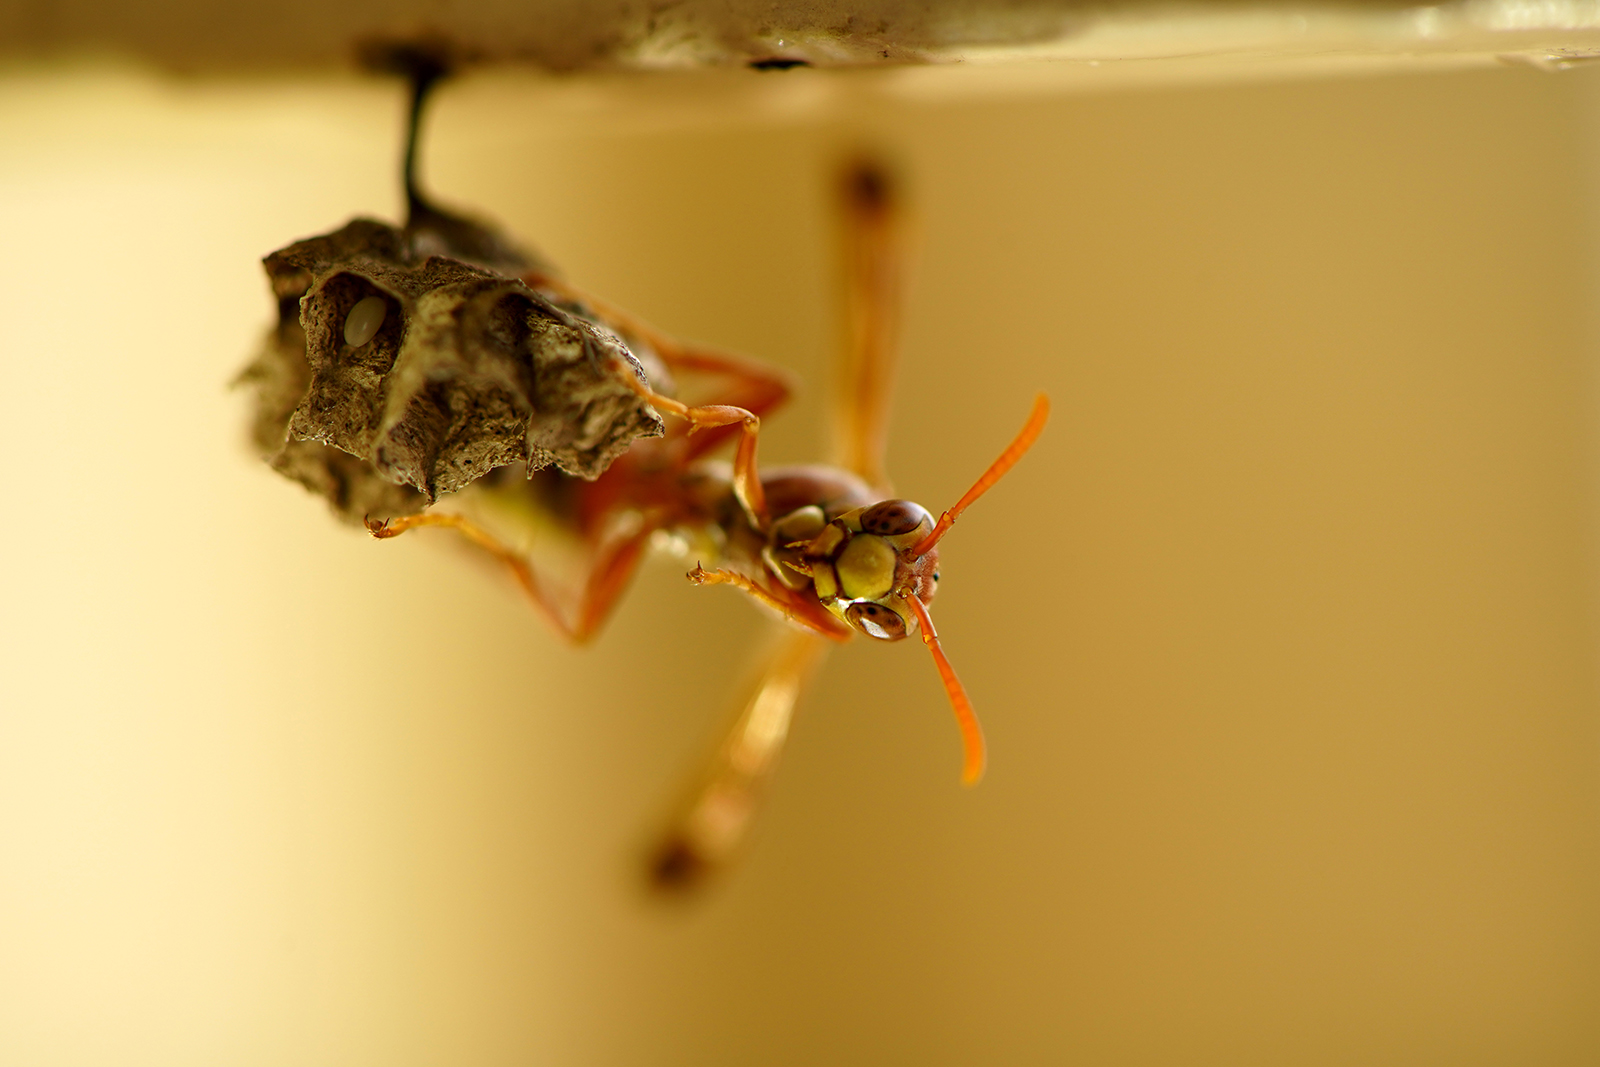 How to tell if a wasp is angry: signs and behavior